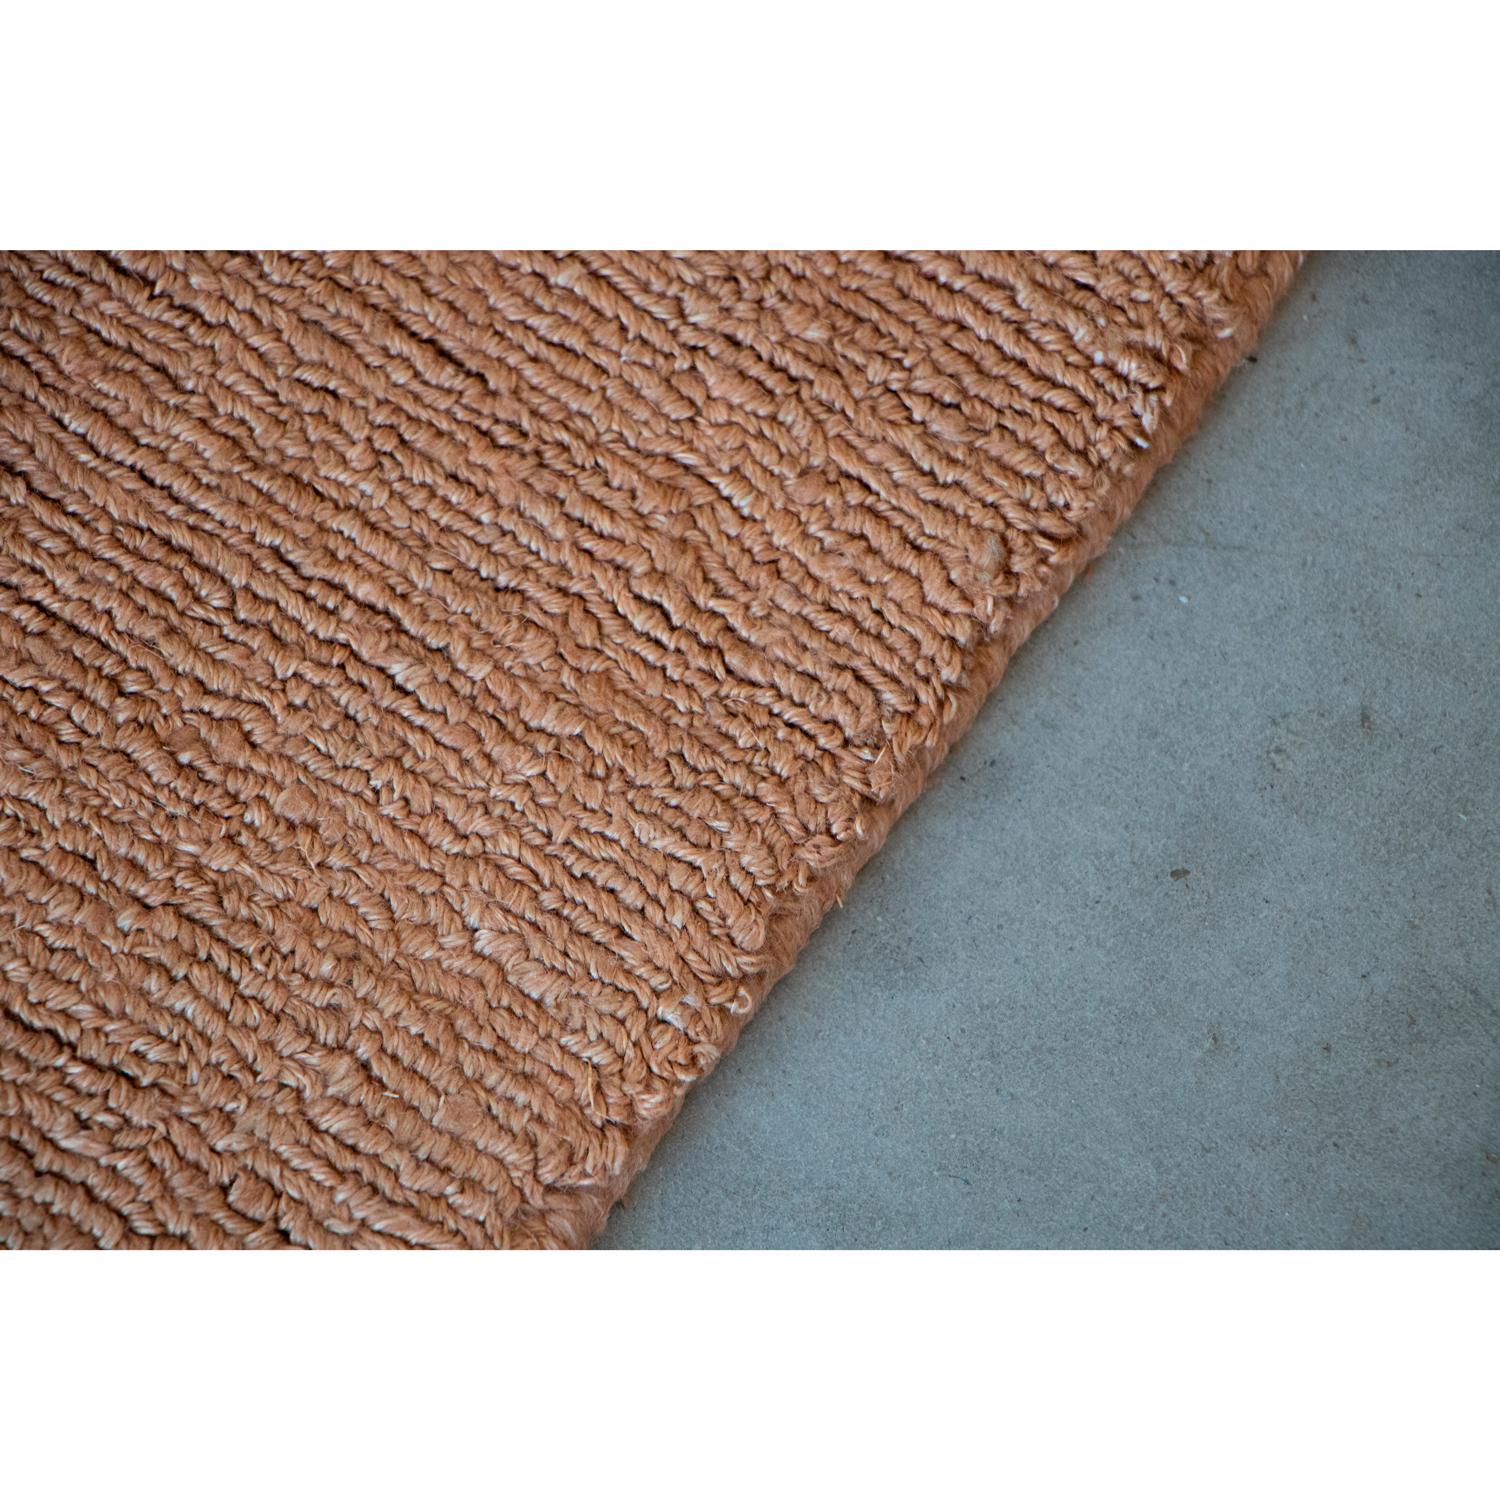 Indian 21st Century Neutral Tones Natural Linen Rug by Deanna Comellini 150x250 cm For Sale